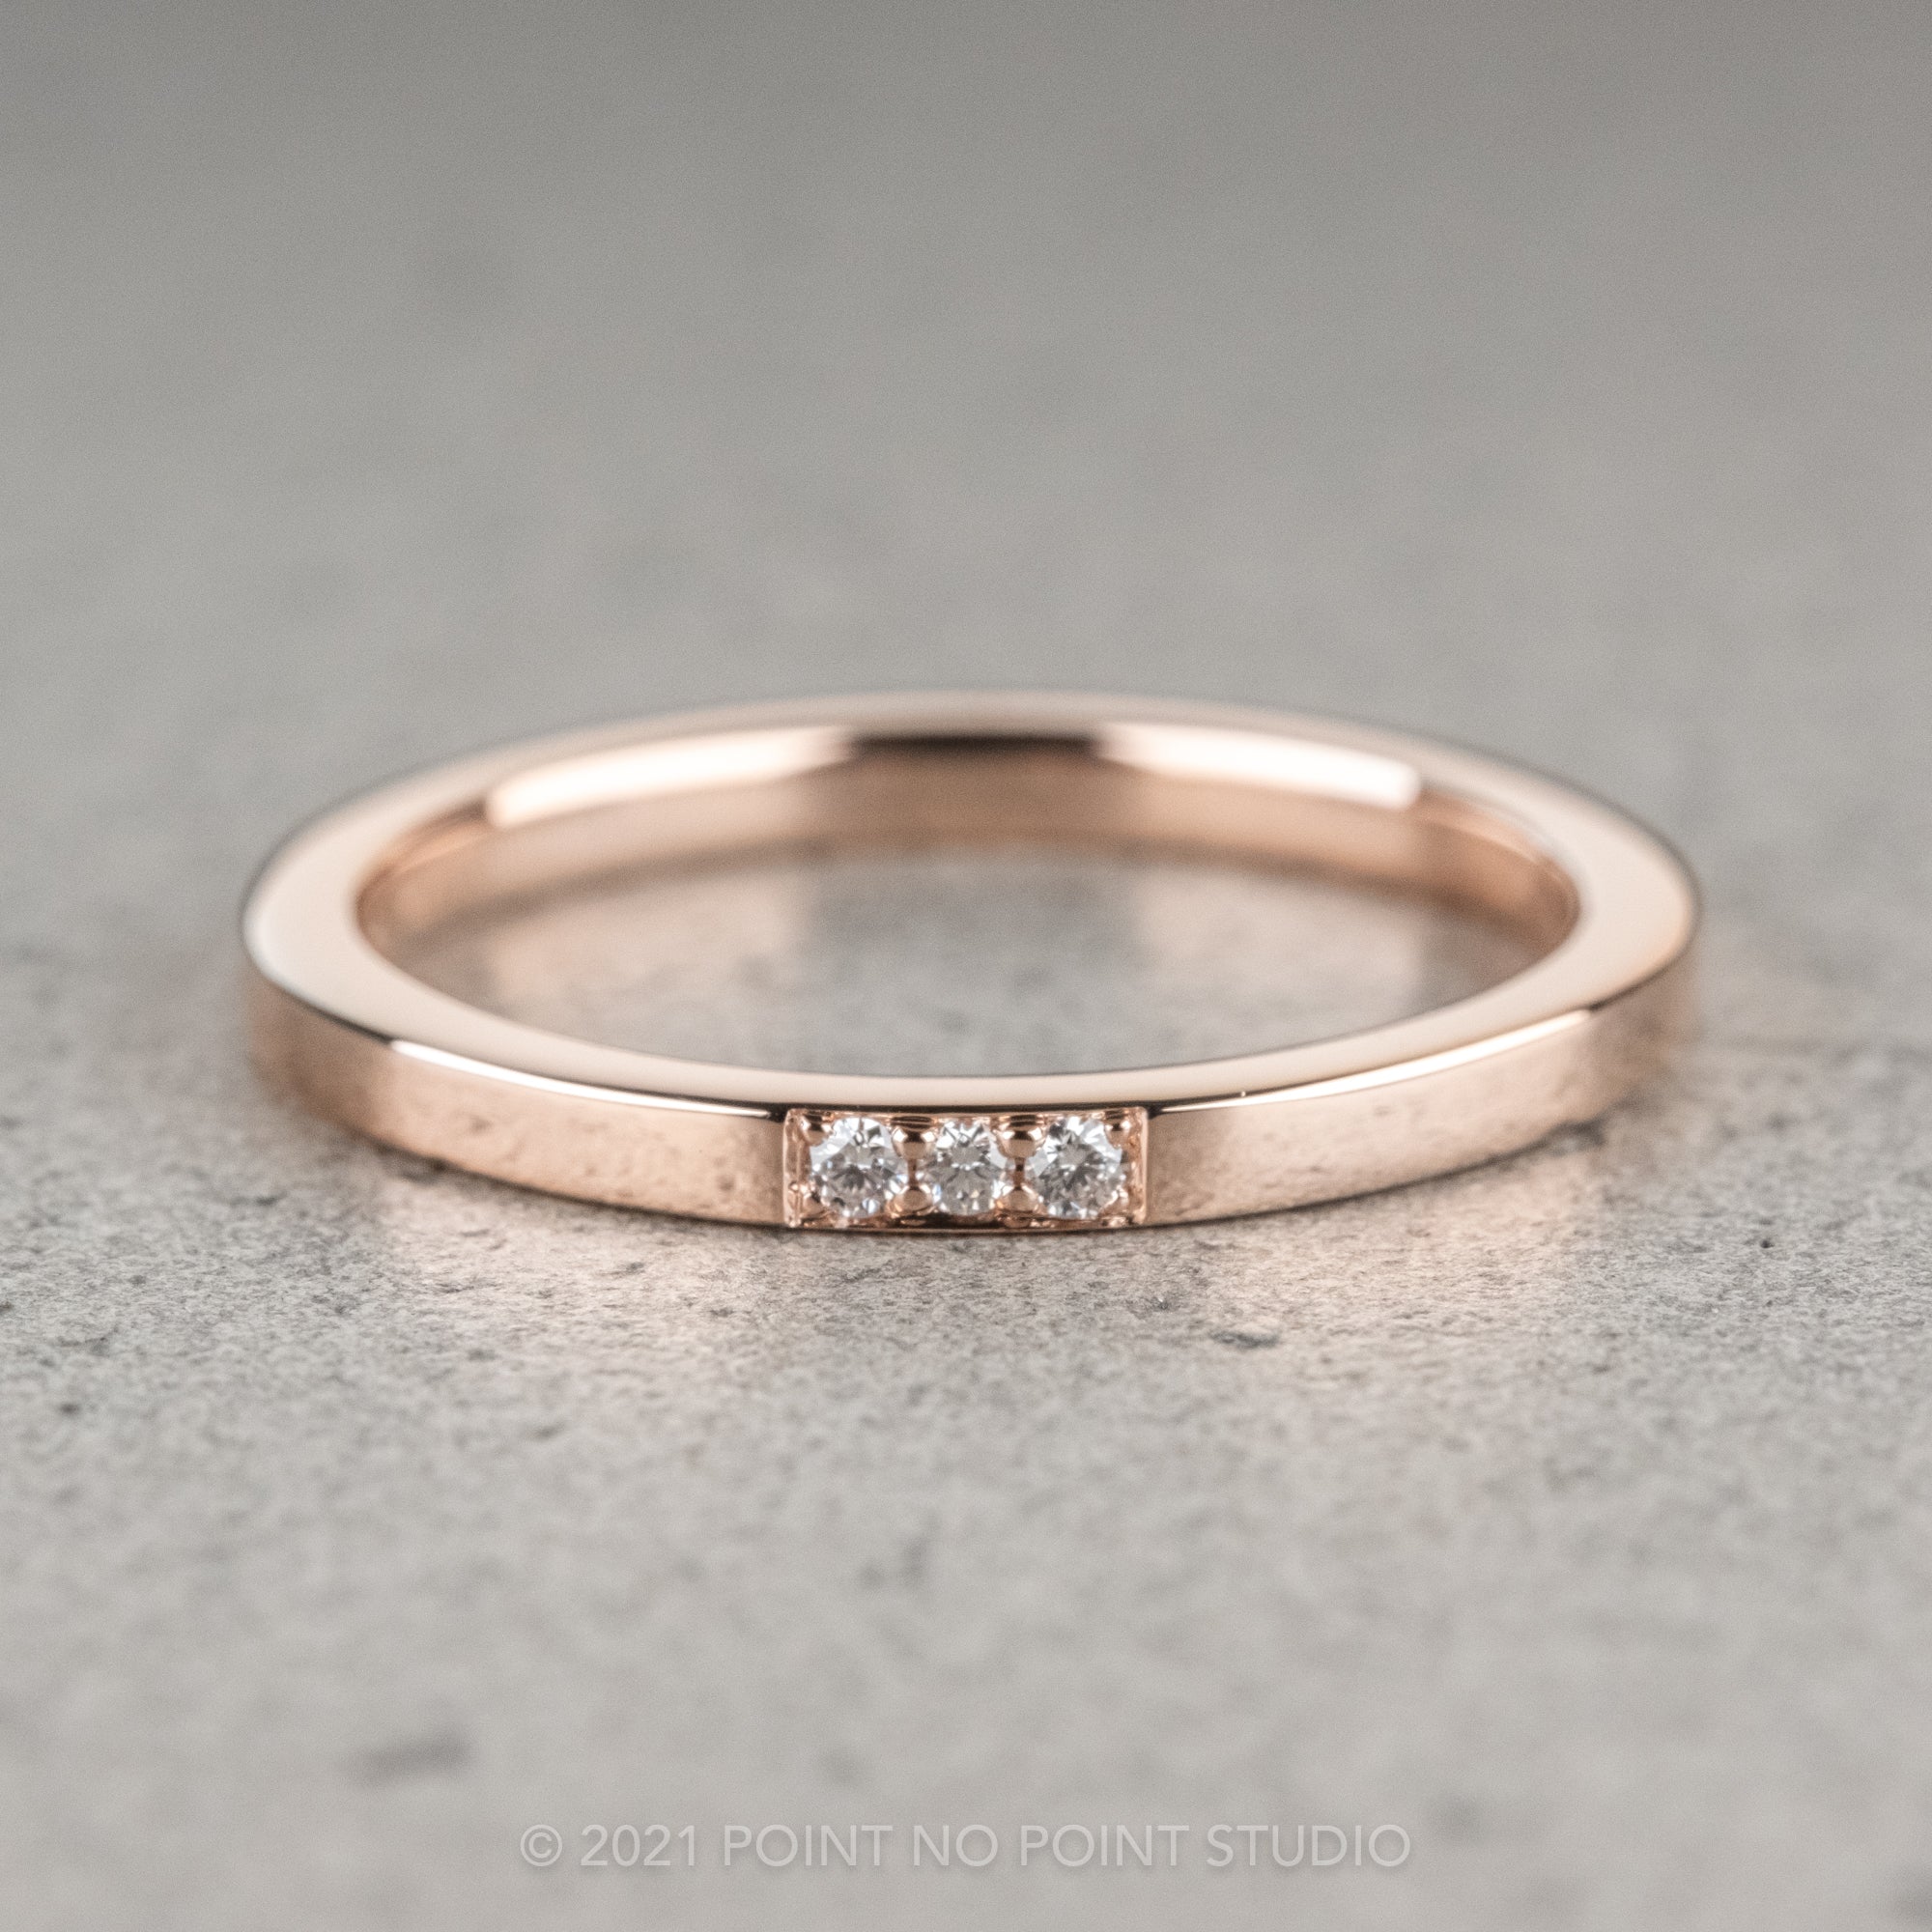 Disney Belle Inspired Wedding Band 14K White Gold and Rose Gold 1/6 CTTW |  Enchanted Disney Fine Jewelry